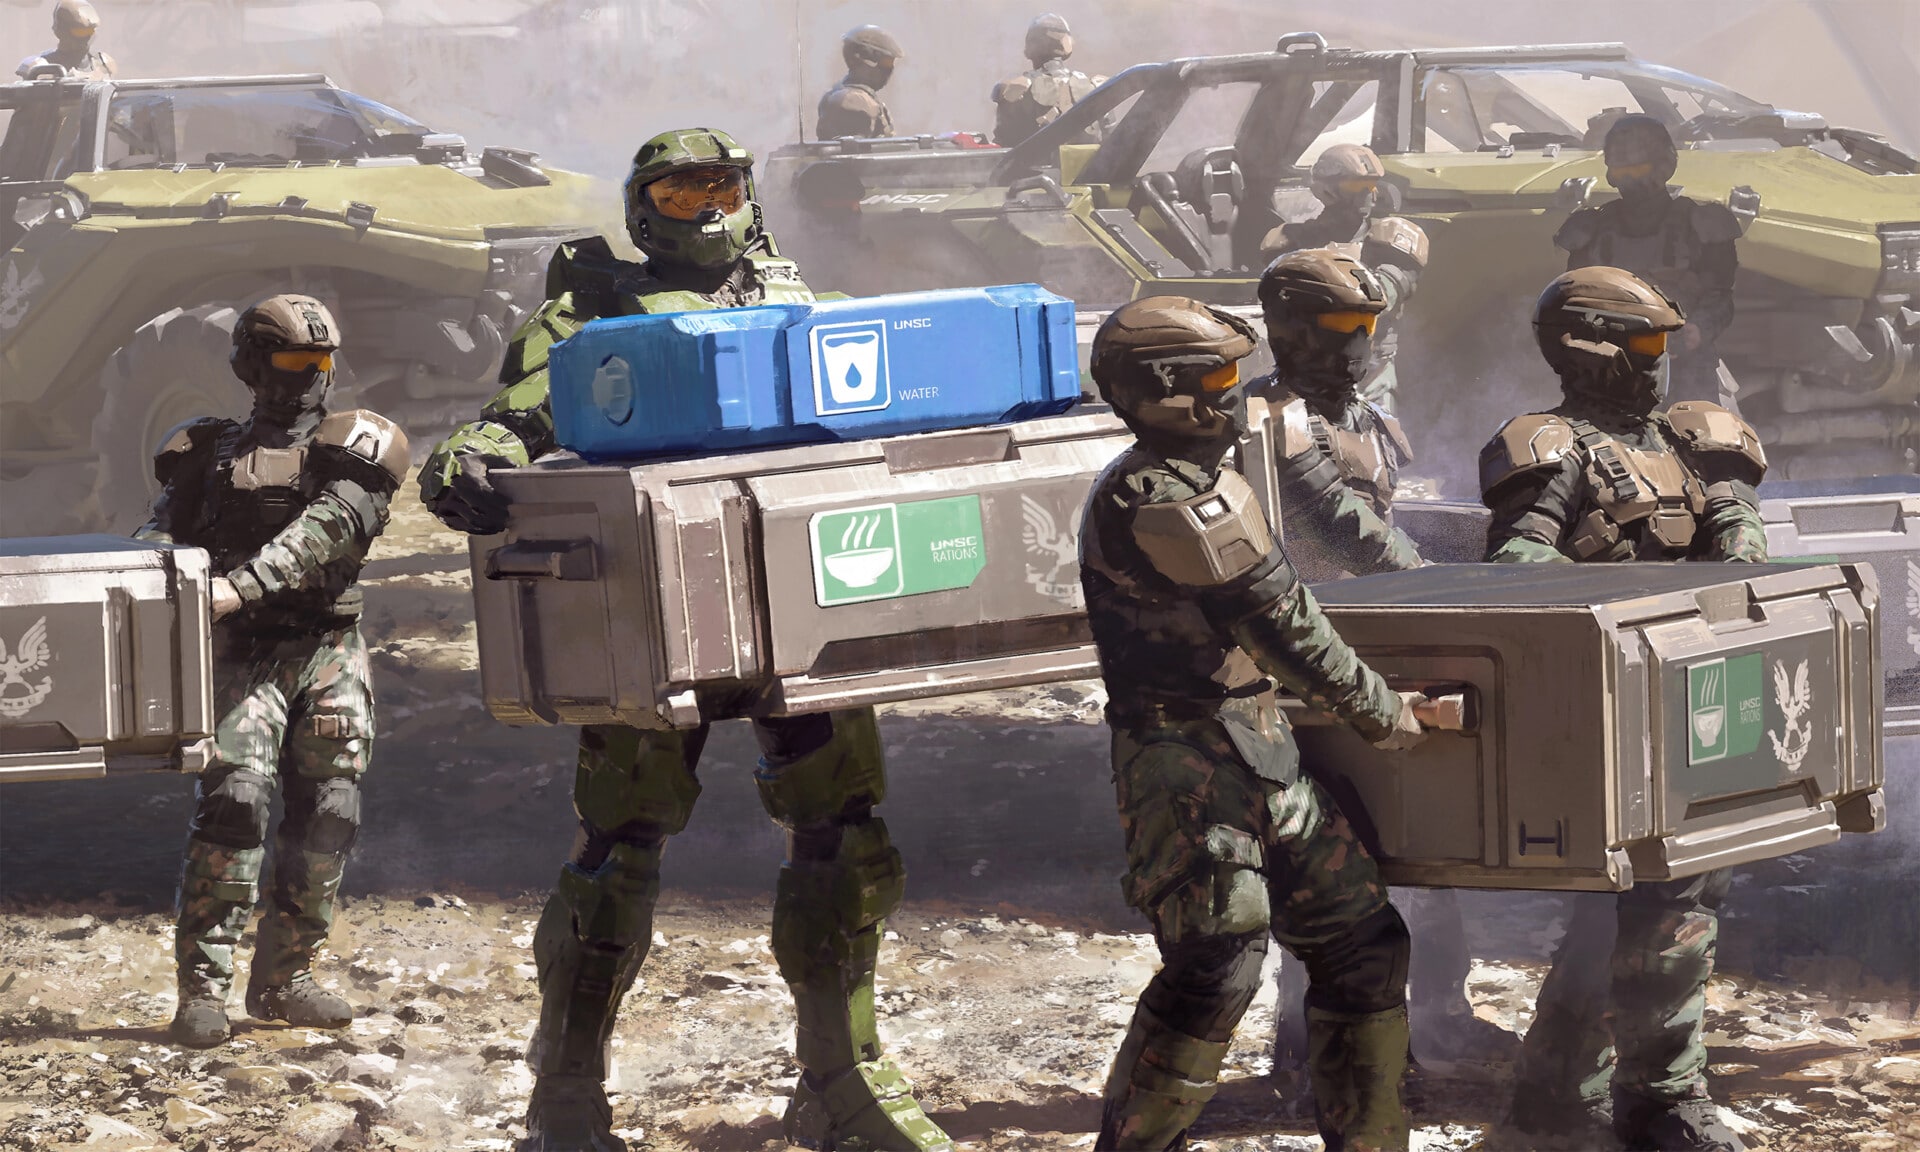 Masterchief in spartan armor carrying crates with Halo Infinite's marines